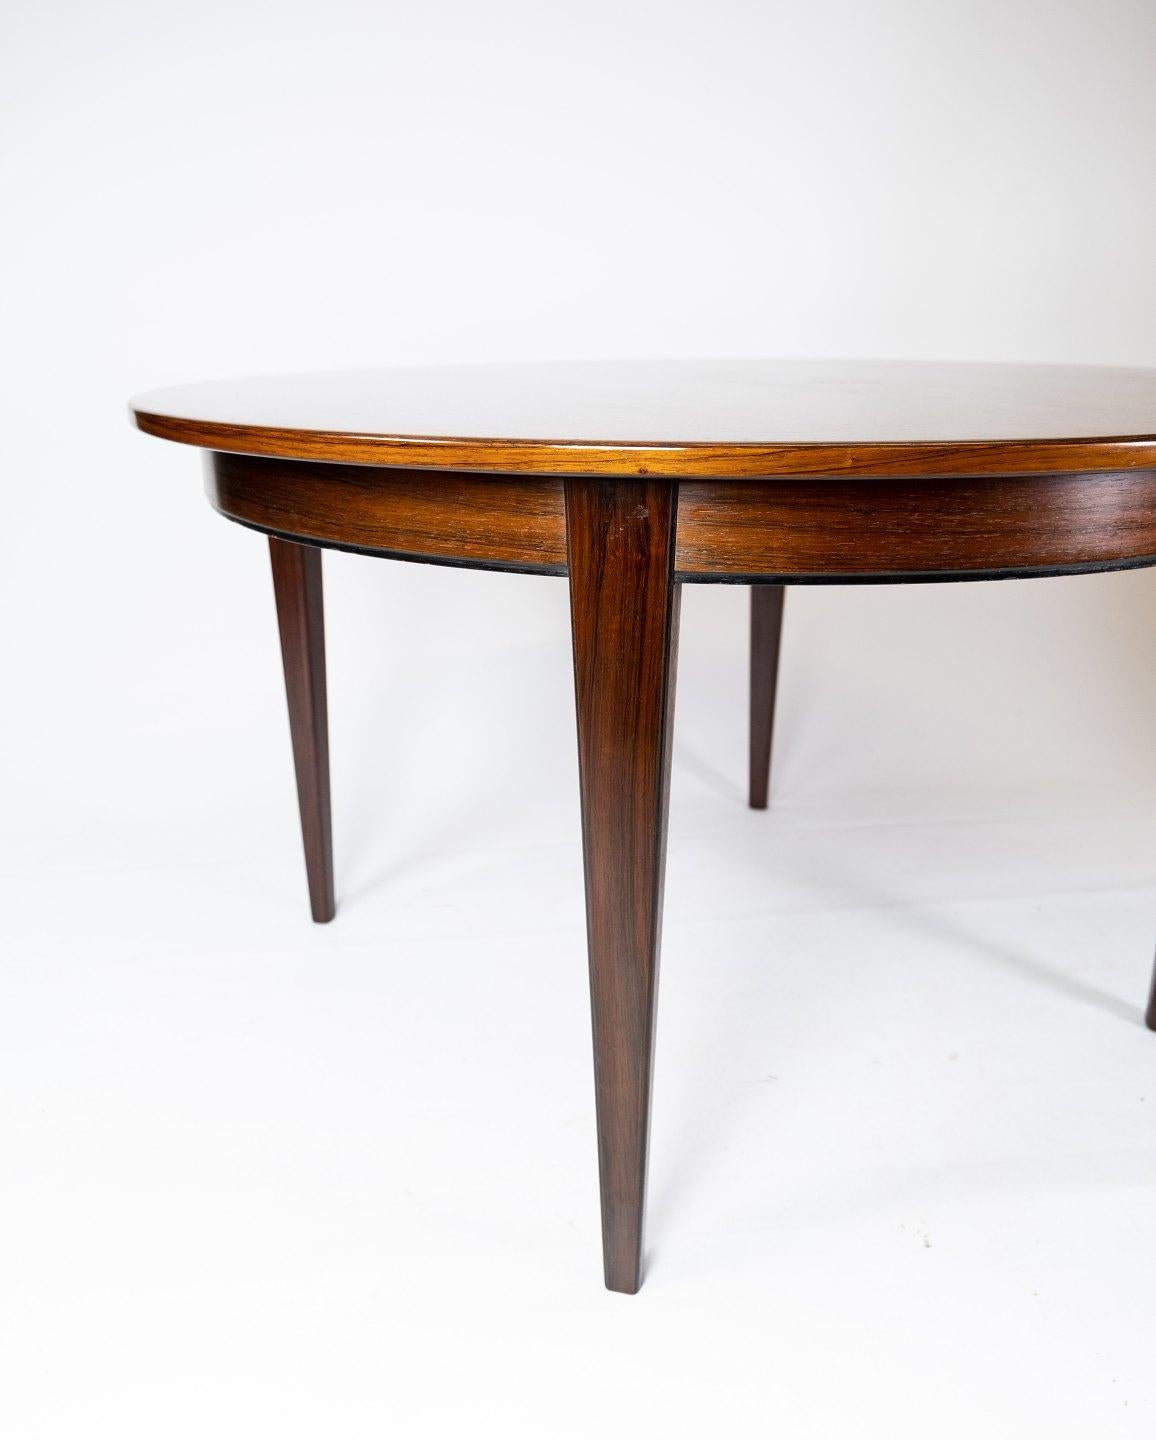 This rosewood dining table is a beautiful example of Danish design from the 1960s and is made by Omann Junior, a renowned Danish furniture manufacturer. The rosewood's characteristic warm tones and beautiful veins give the table a timeless elegance